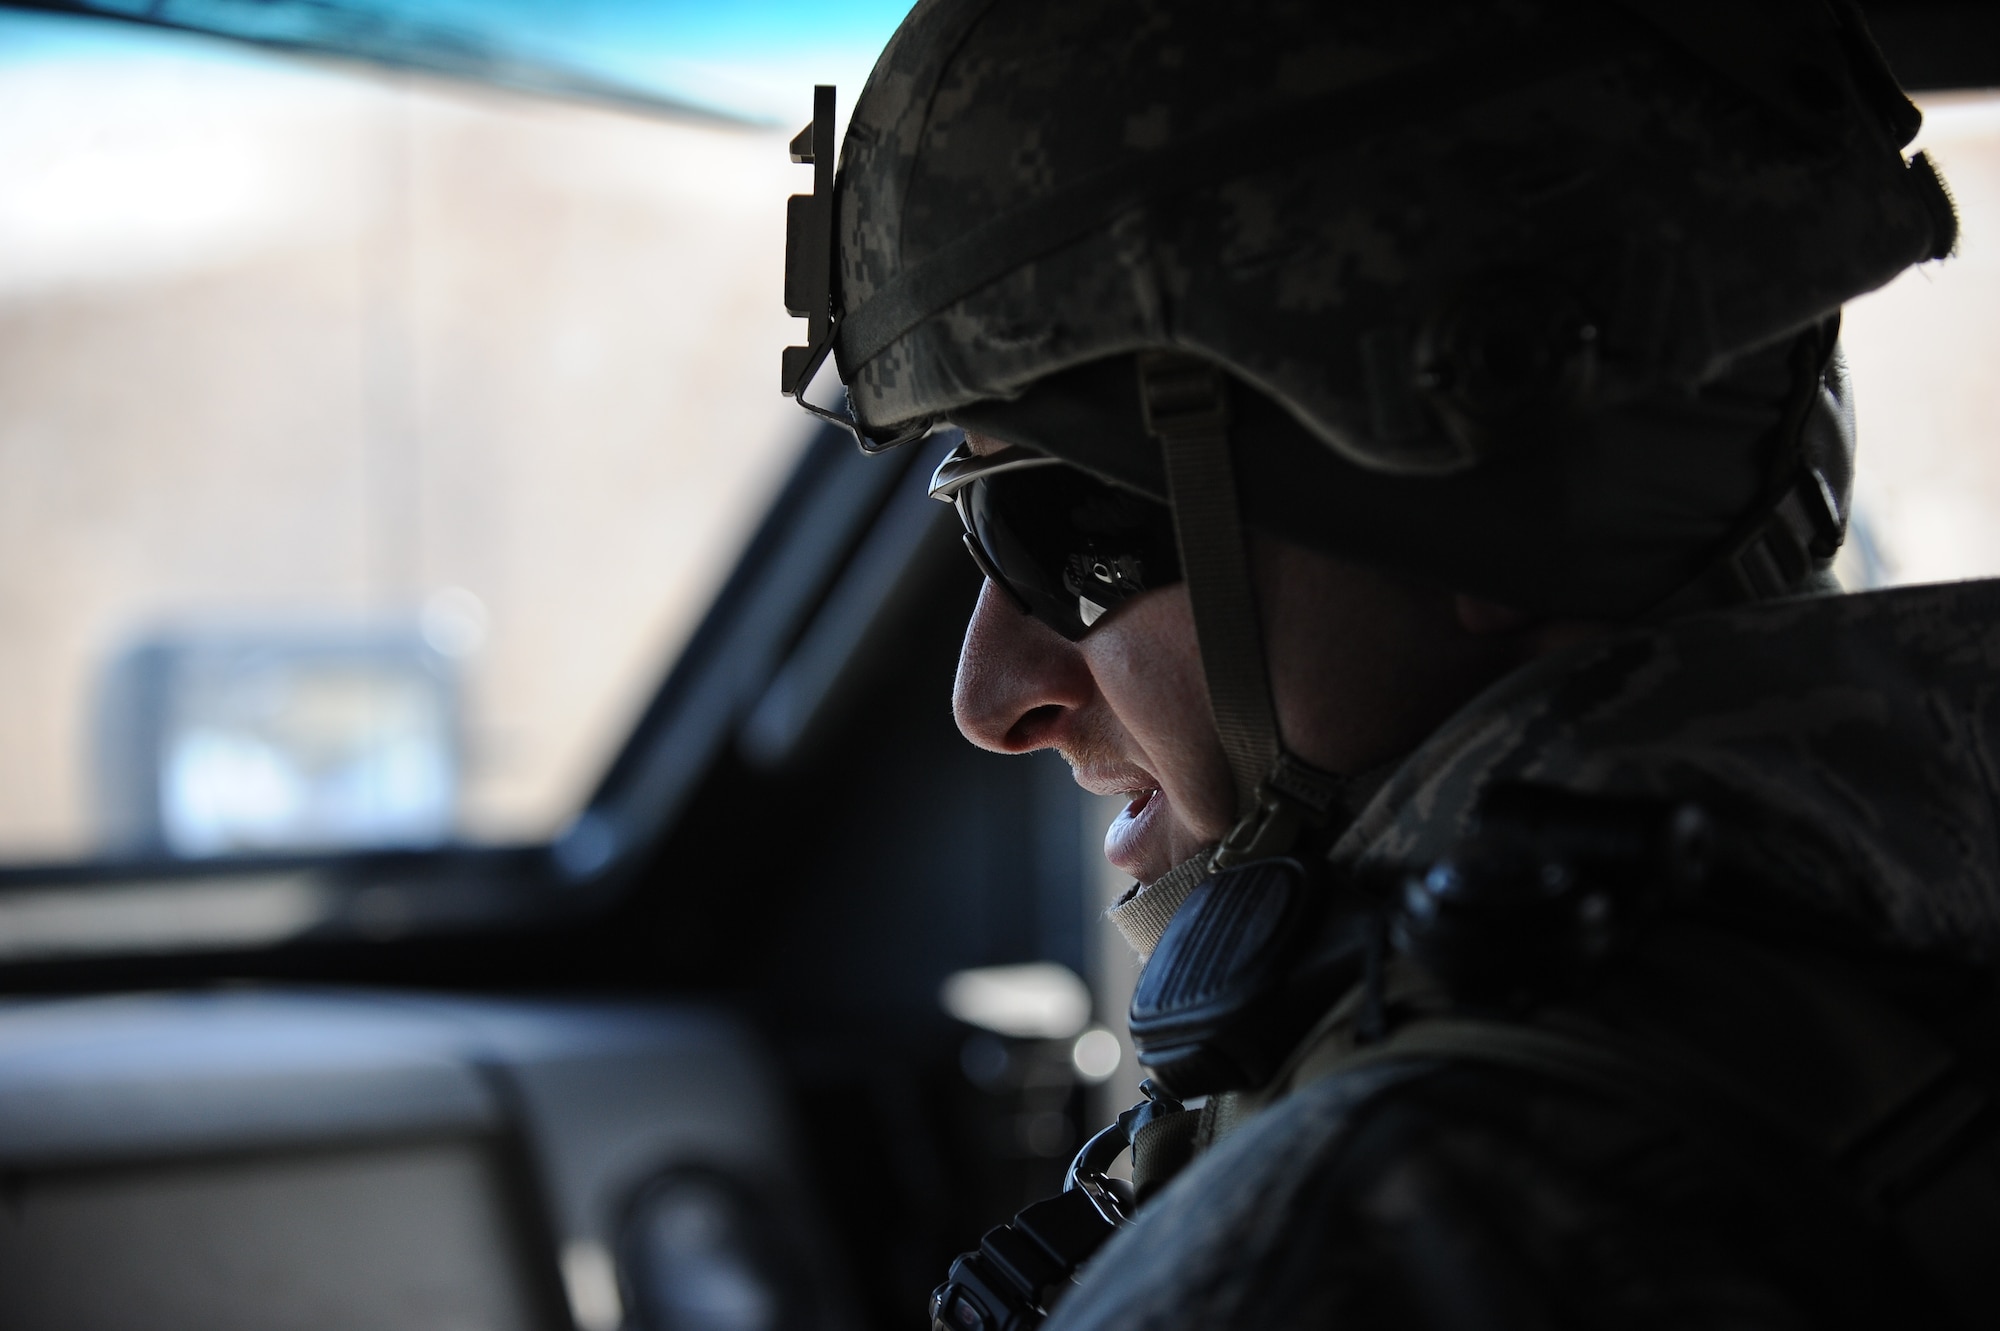 Capt. Greg Goodman, North Dakota Air National Guard, 219th Security Force Squadron operations officer, leads a convoy in the 91st Missile Wing missile complex, March 12, 2014. Goodman was the first-ever guardsman to become certified as a convoy commander in the history of the Air Force. (U.S. Air Force photo/ Airman 1st Class Lauren Pitts)